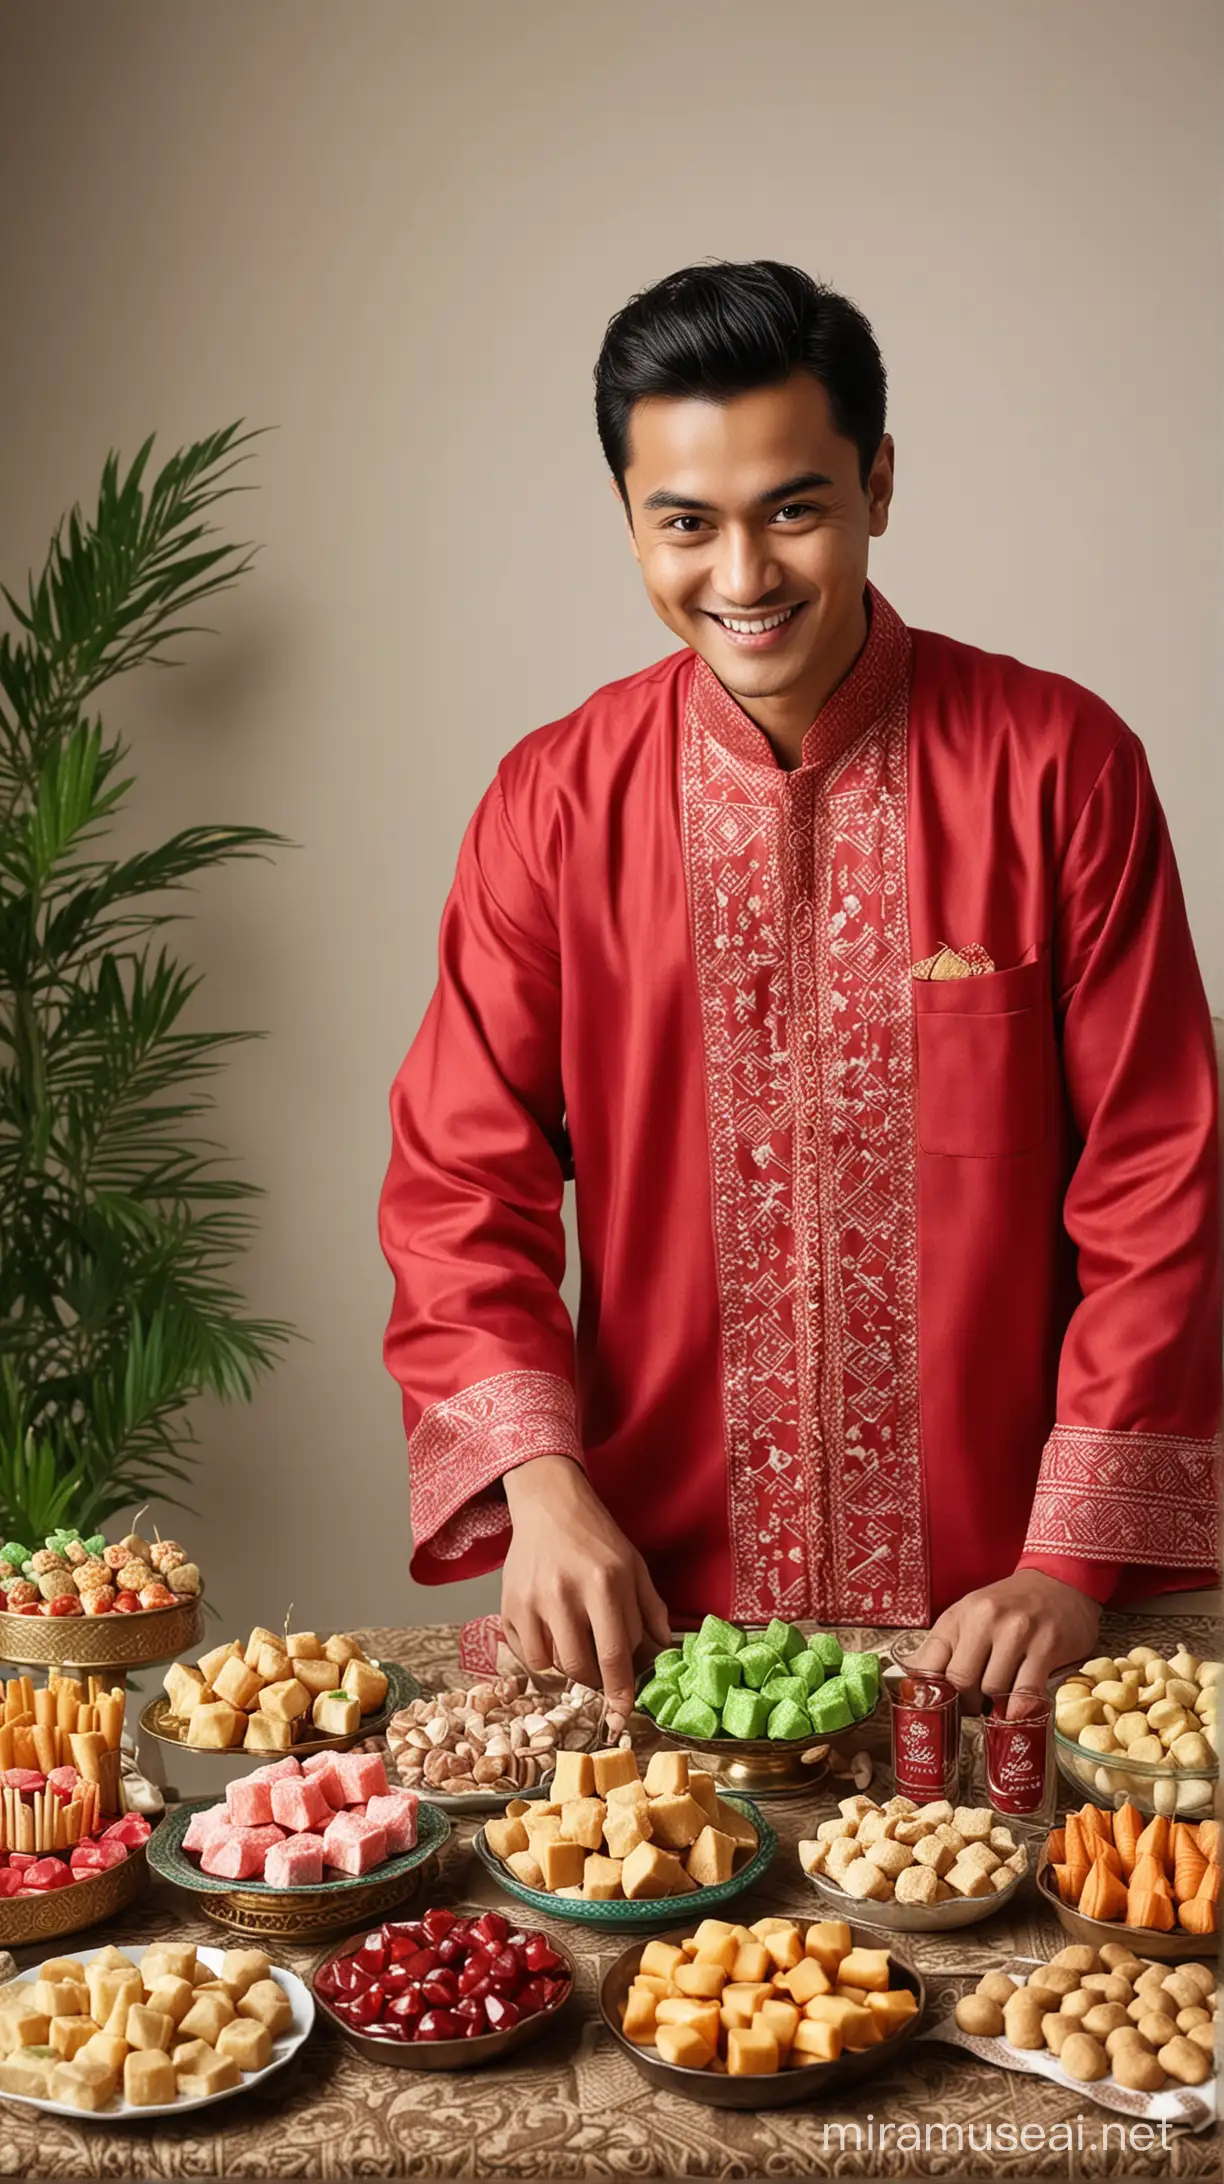 A real picture of a smiling, elegant Indonesian young man celebrating Eid al-Fitr. In front of him is a table with a variety of sweets, ketupat and tea. He is wearing a half-white and half-red robe. Behind him is the name “Karim” written in red crystal, and in his hands is the phrase “Eid mubarak.” A high-quality, realistic picture.hd, 4k